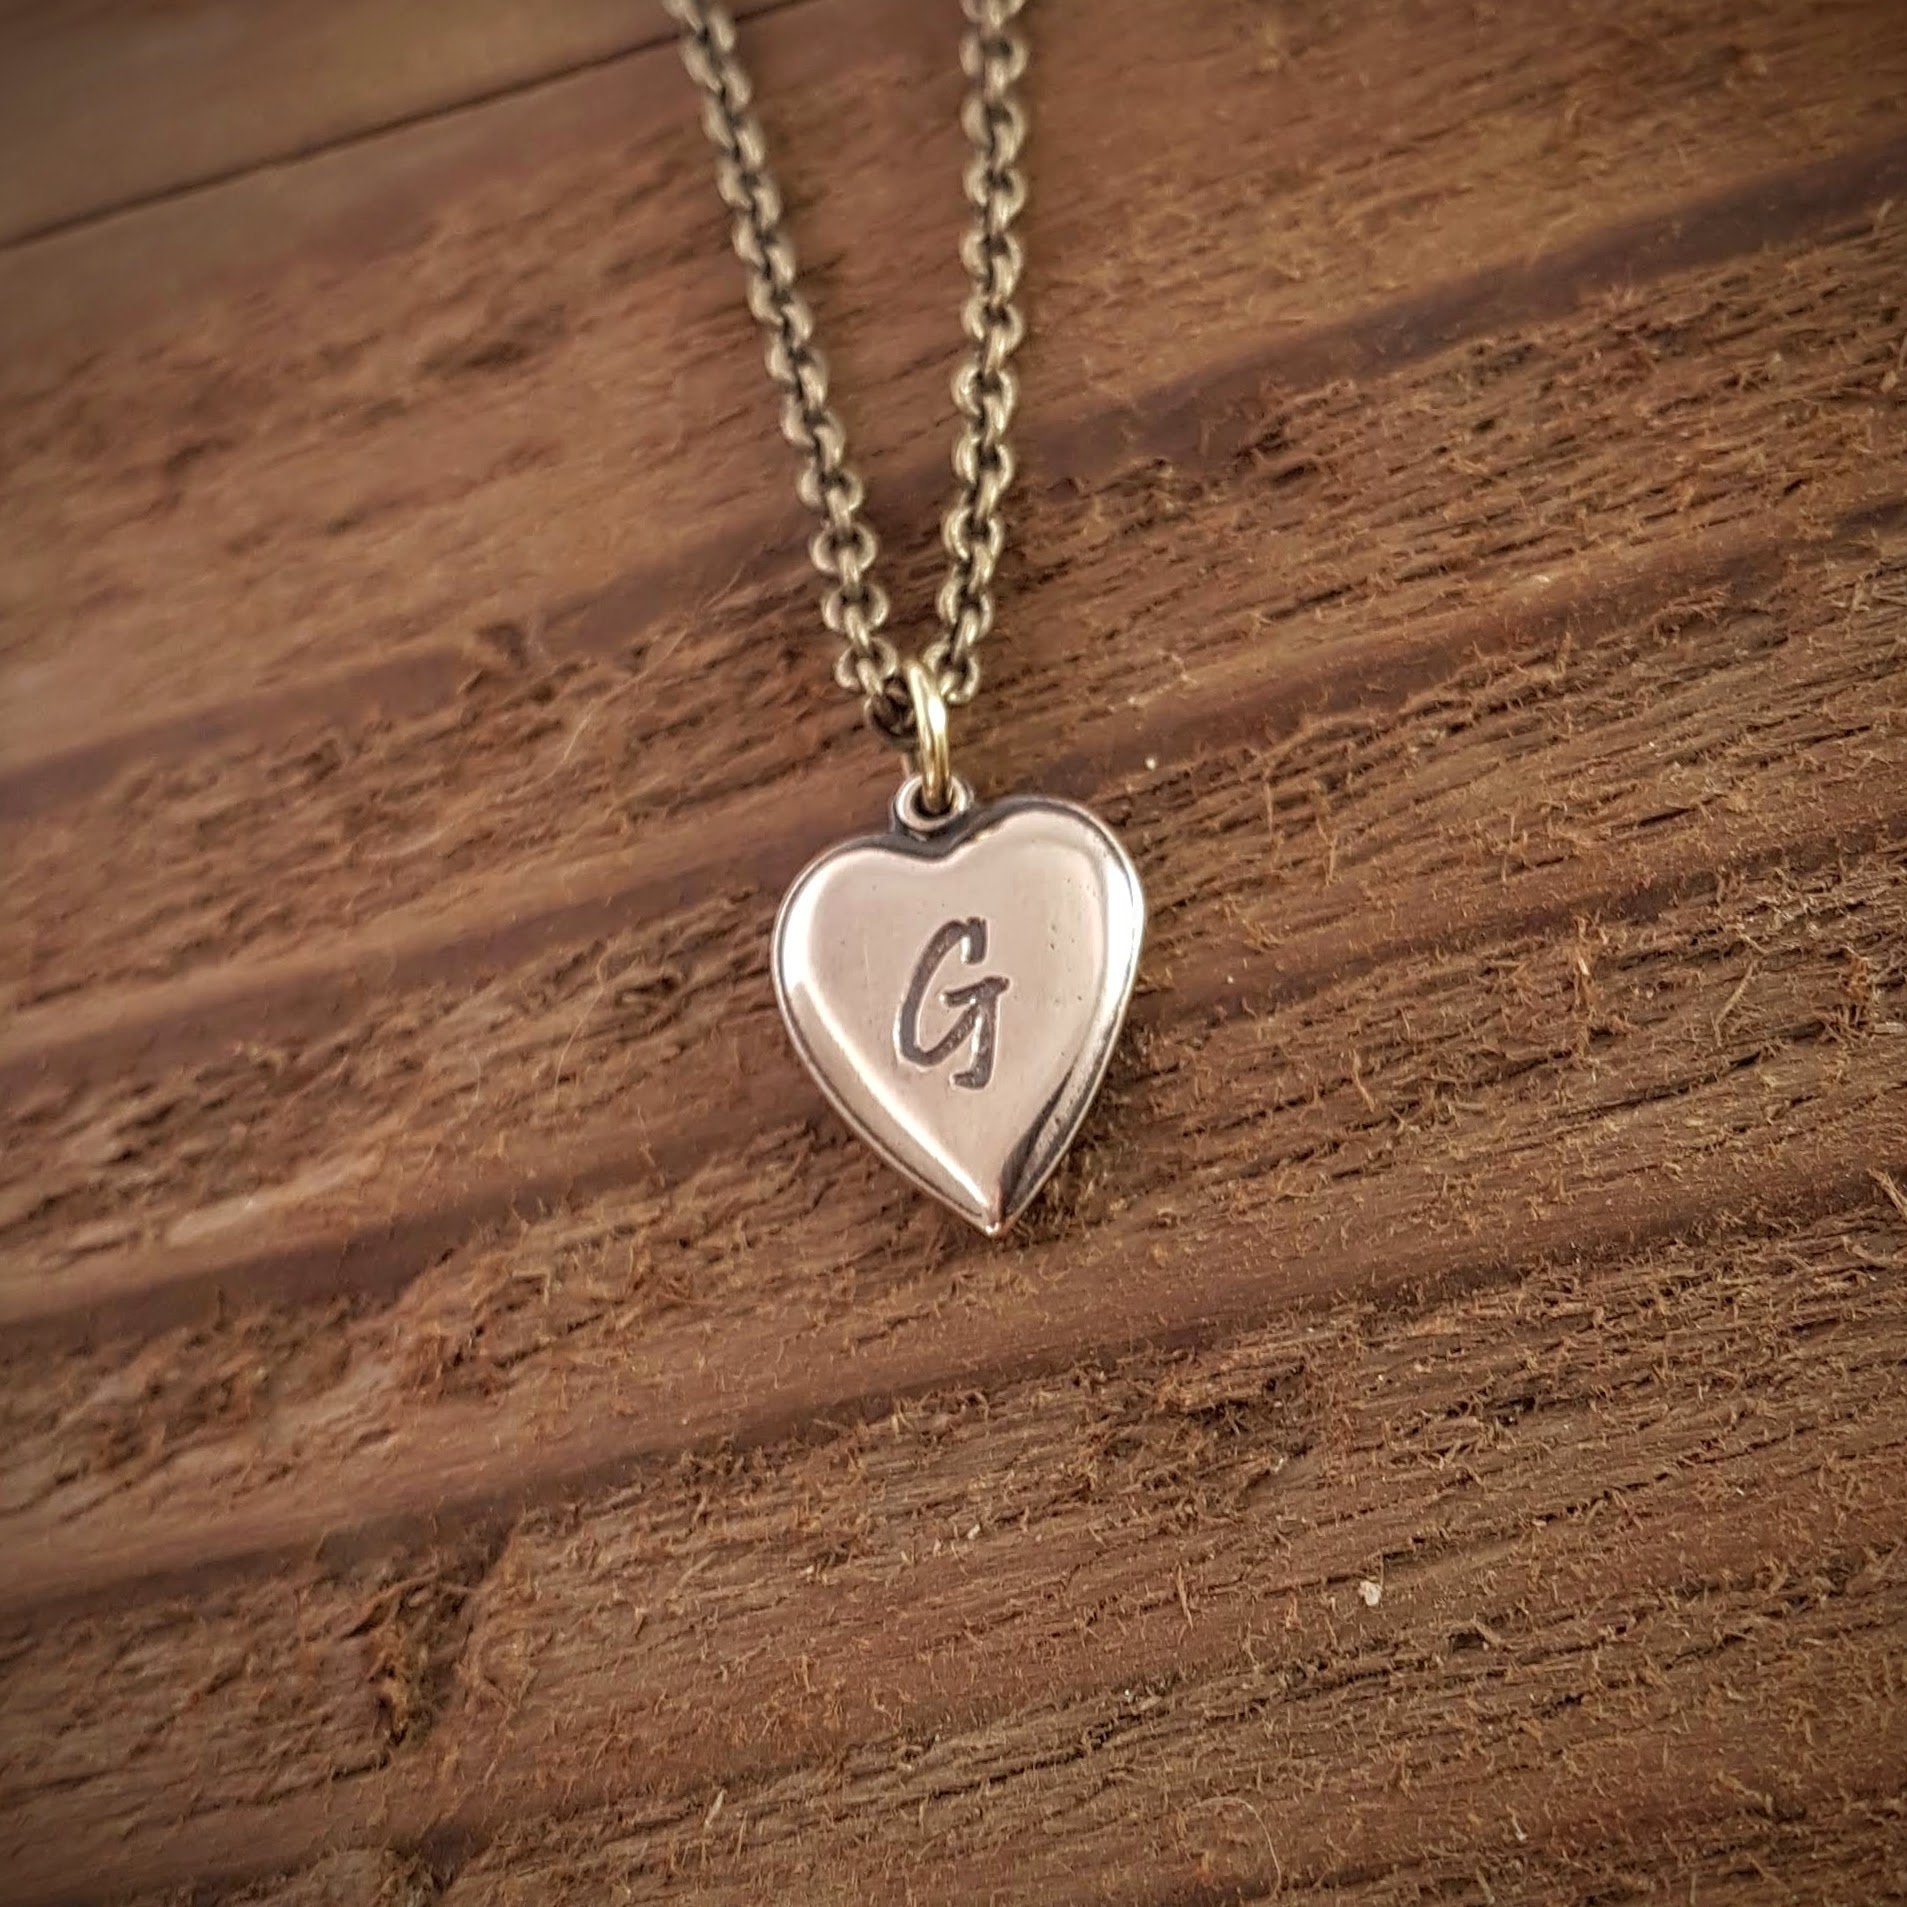 Personalized Heart Necklace Gold Bronze Engraved, Name Initials Fun Quote Custom Date Initial Symbol Saying Message Image Charm Necklacec - Gwen Delicious Jewelry Designs